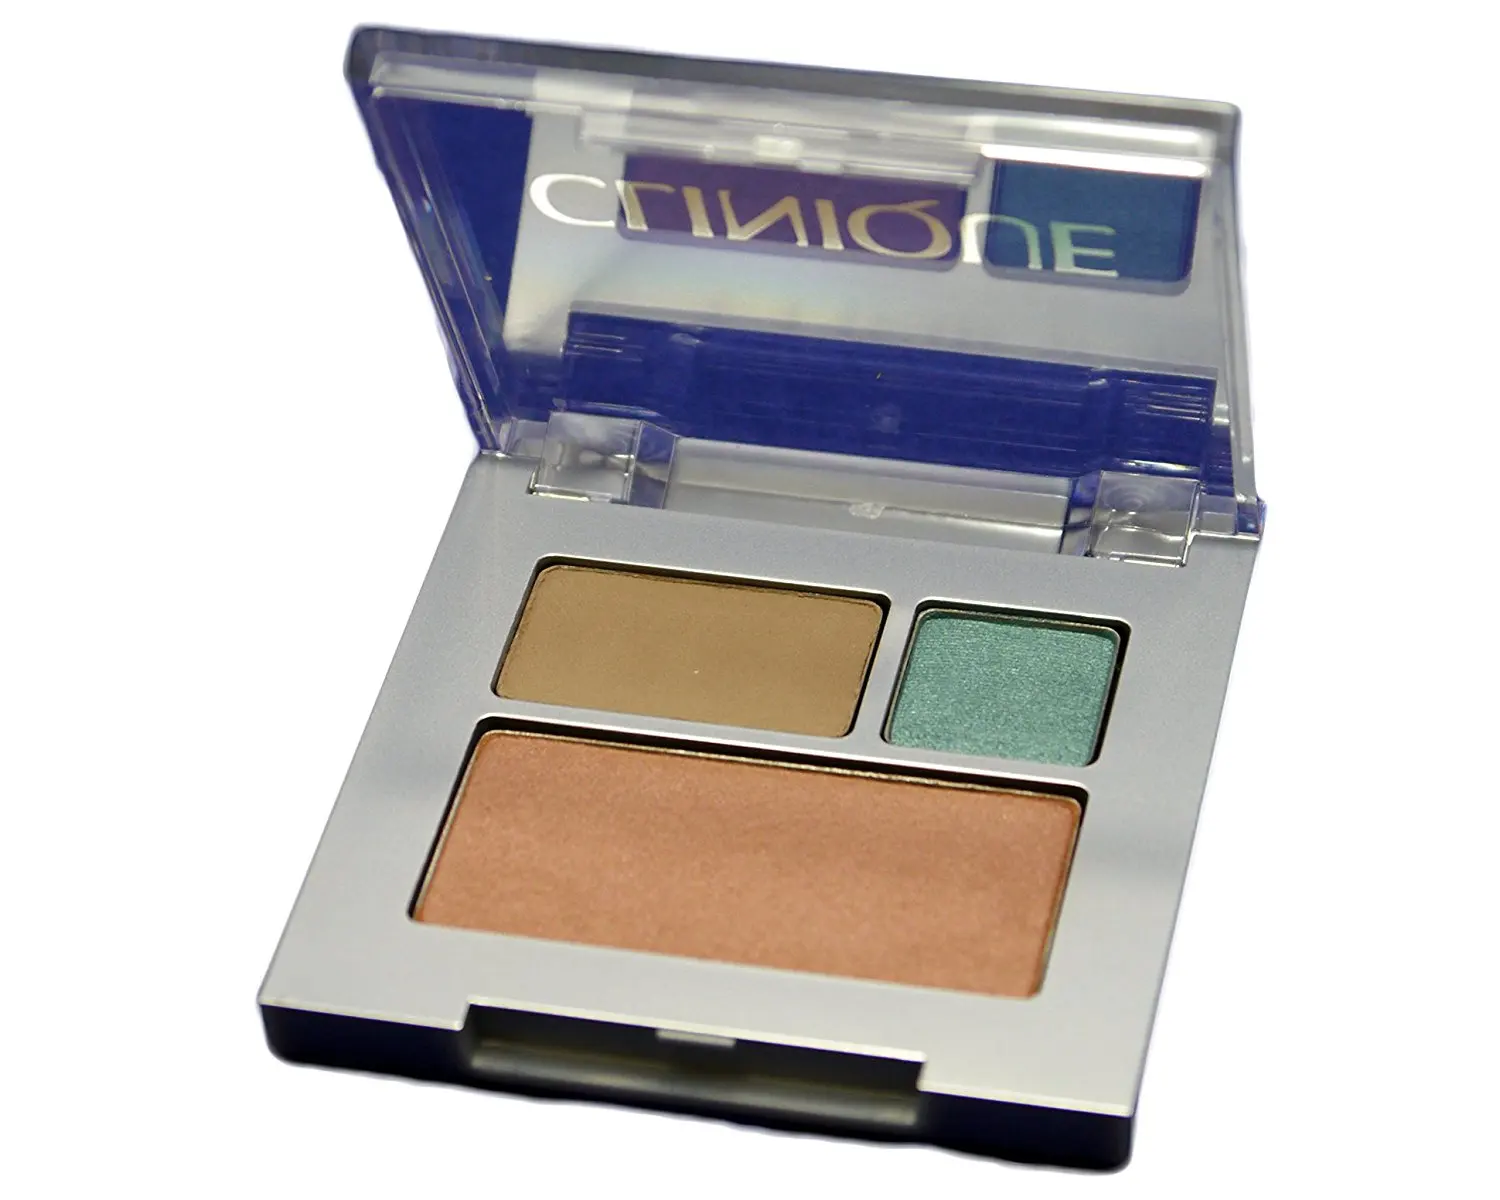 NEW Clinique Duo Eyeshadow/Blush Mini Palette This is a 